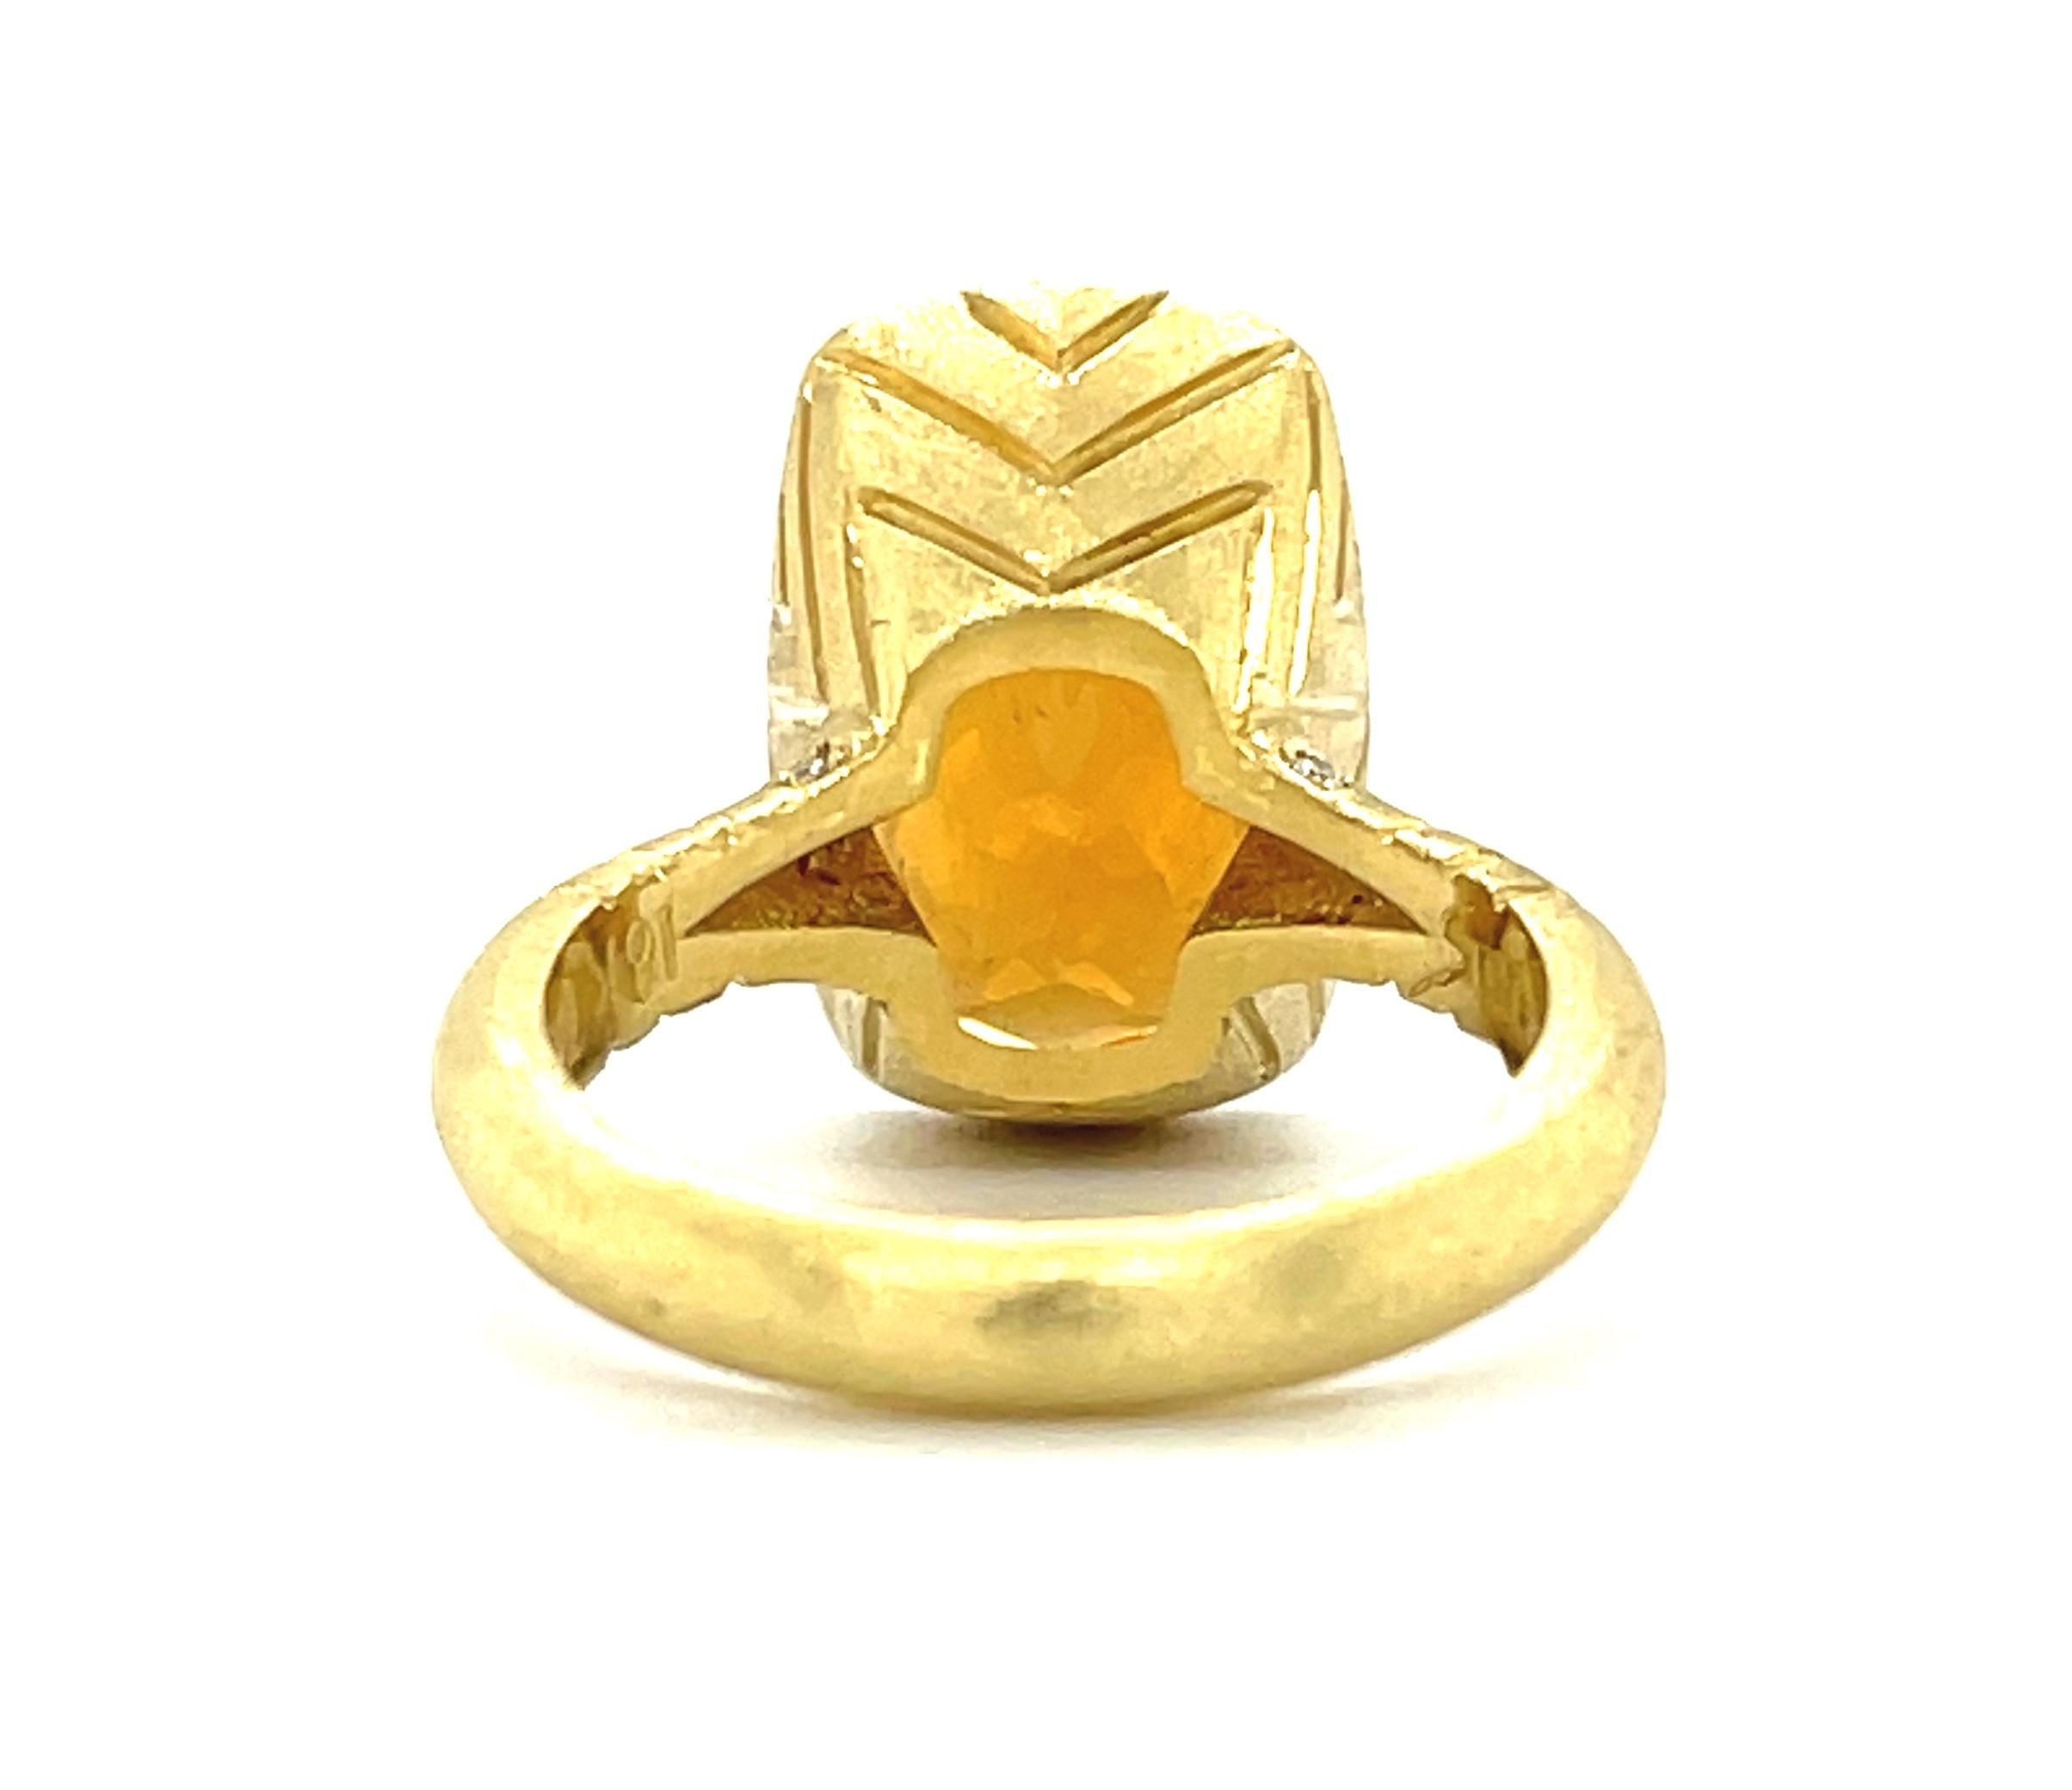 Cushion Cut Golden Tourmaline and Diamond Ring in 18k Yellow Gold, 8.24 Carats For Sale